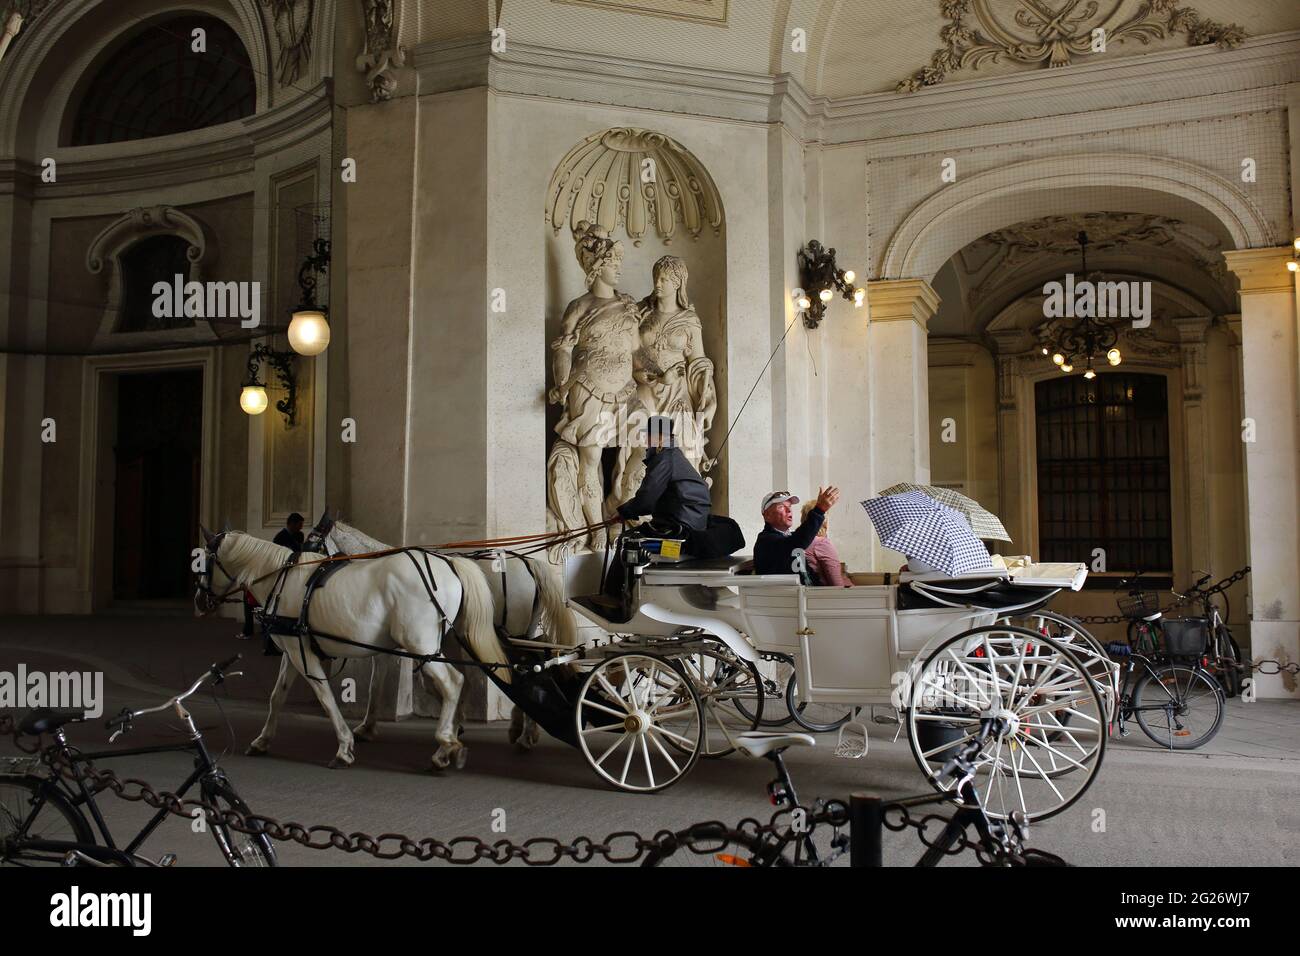 Like film frame,Those who tour the old town by horse-drawn carriage, in the hofburg palace passage corridor Stock Photo